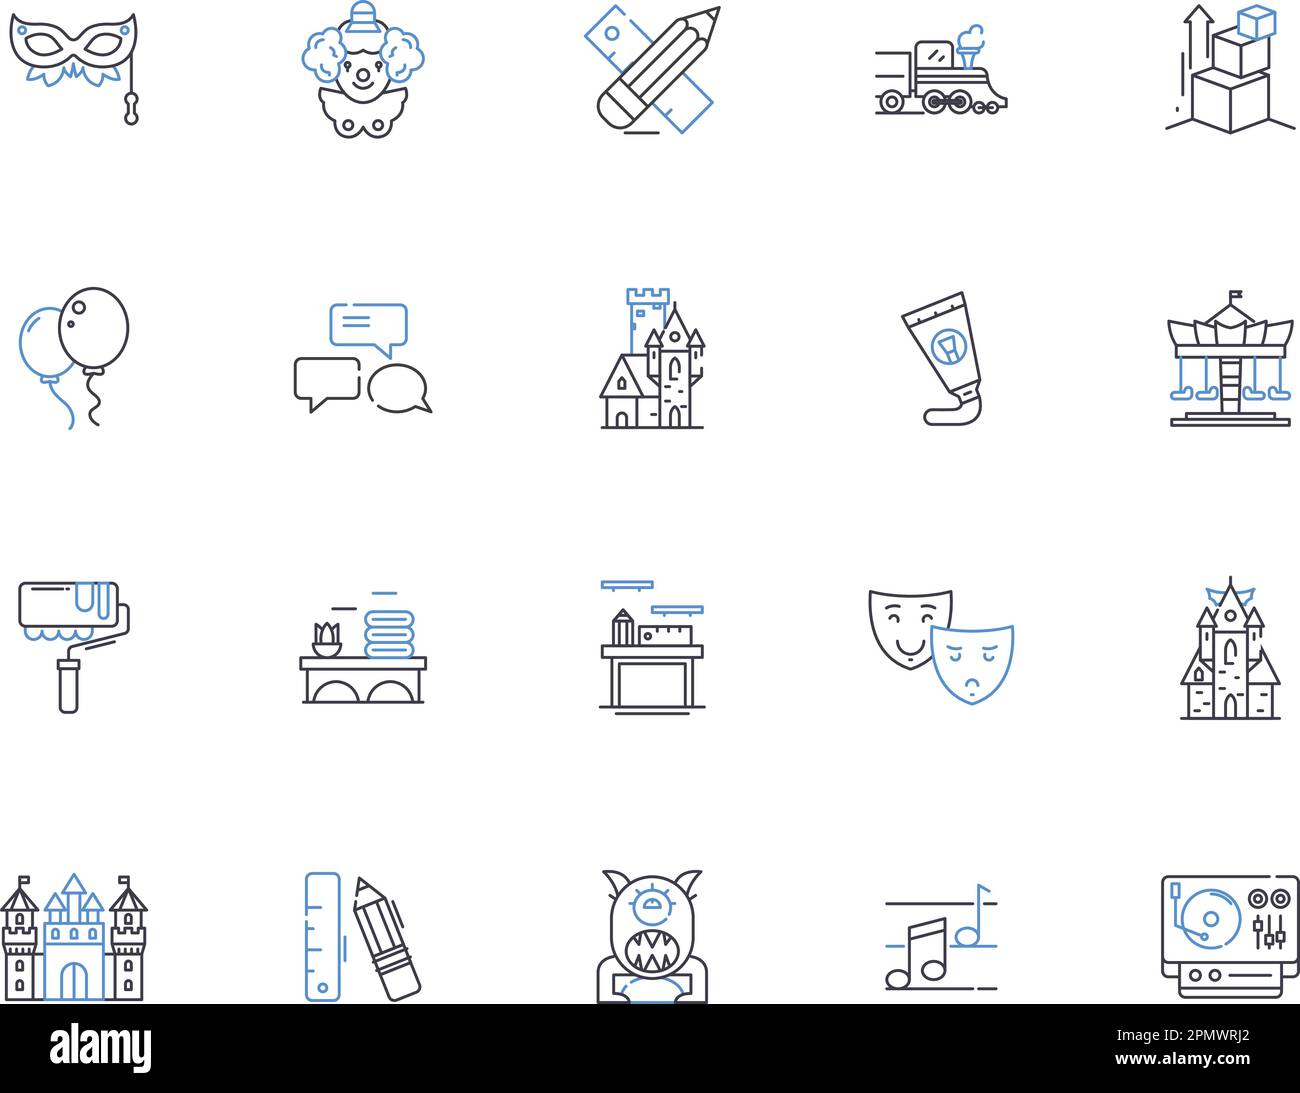 visual art outline icons collection. Painting, Drawing, Sculpture, Printmaking, Collage, Photography, Mixed-Media vector and illustration concept set Stock Vector